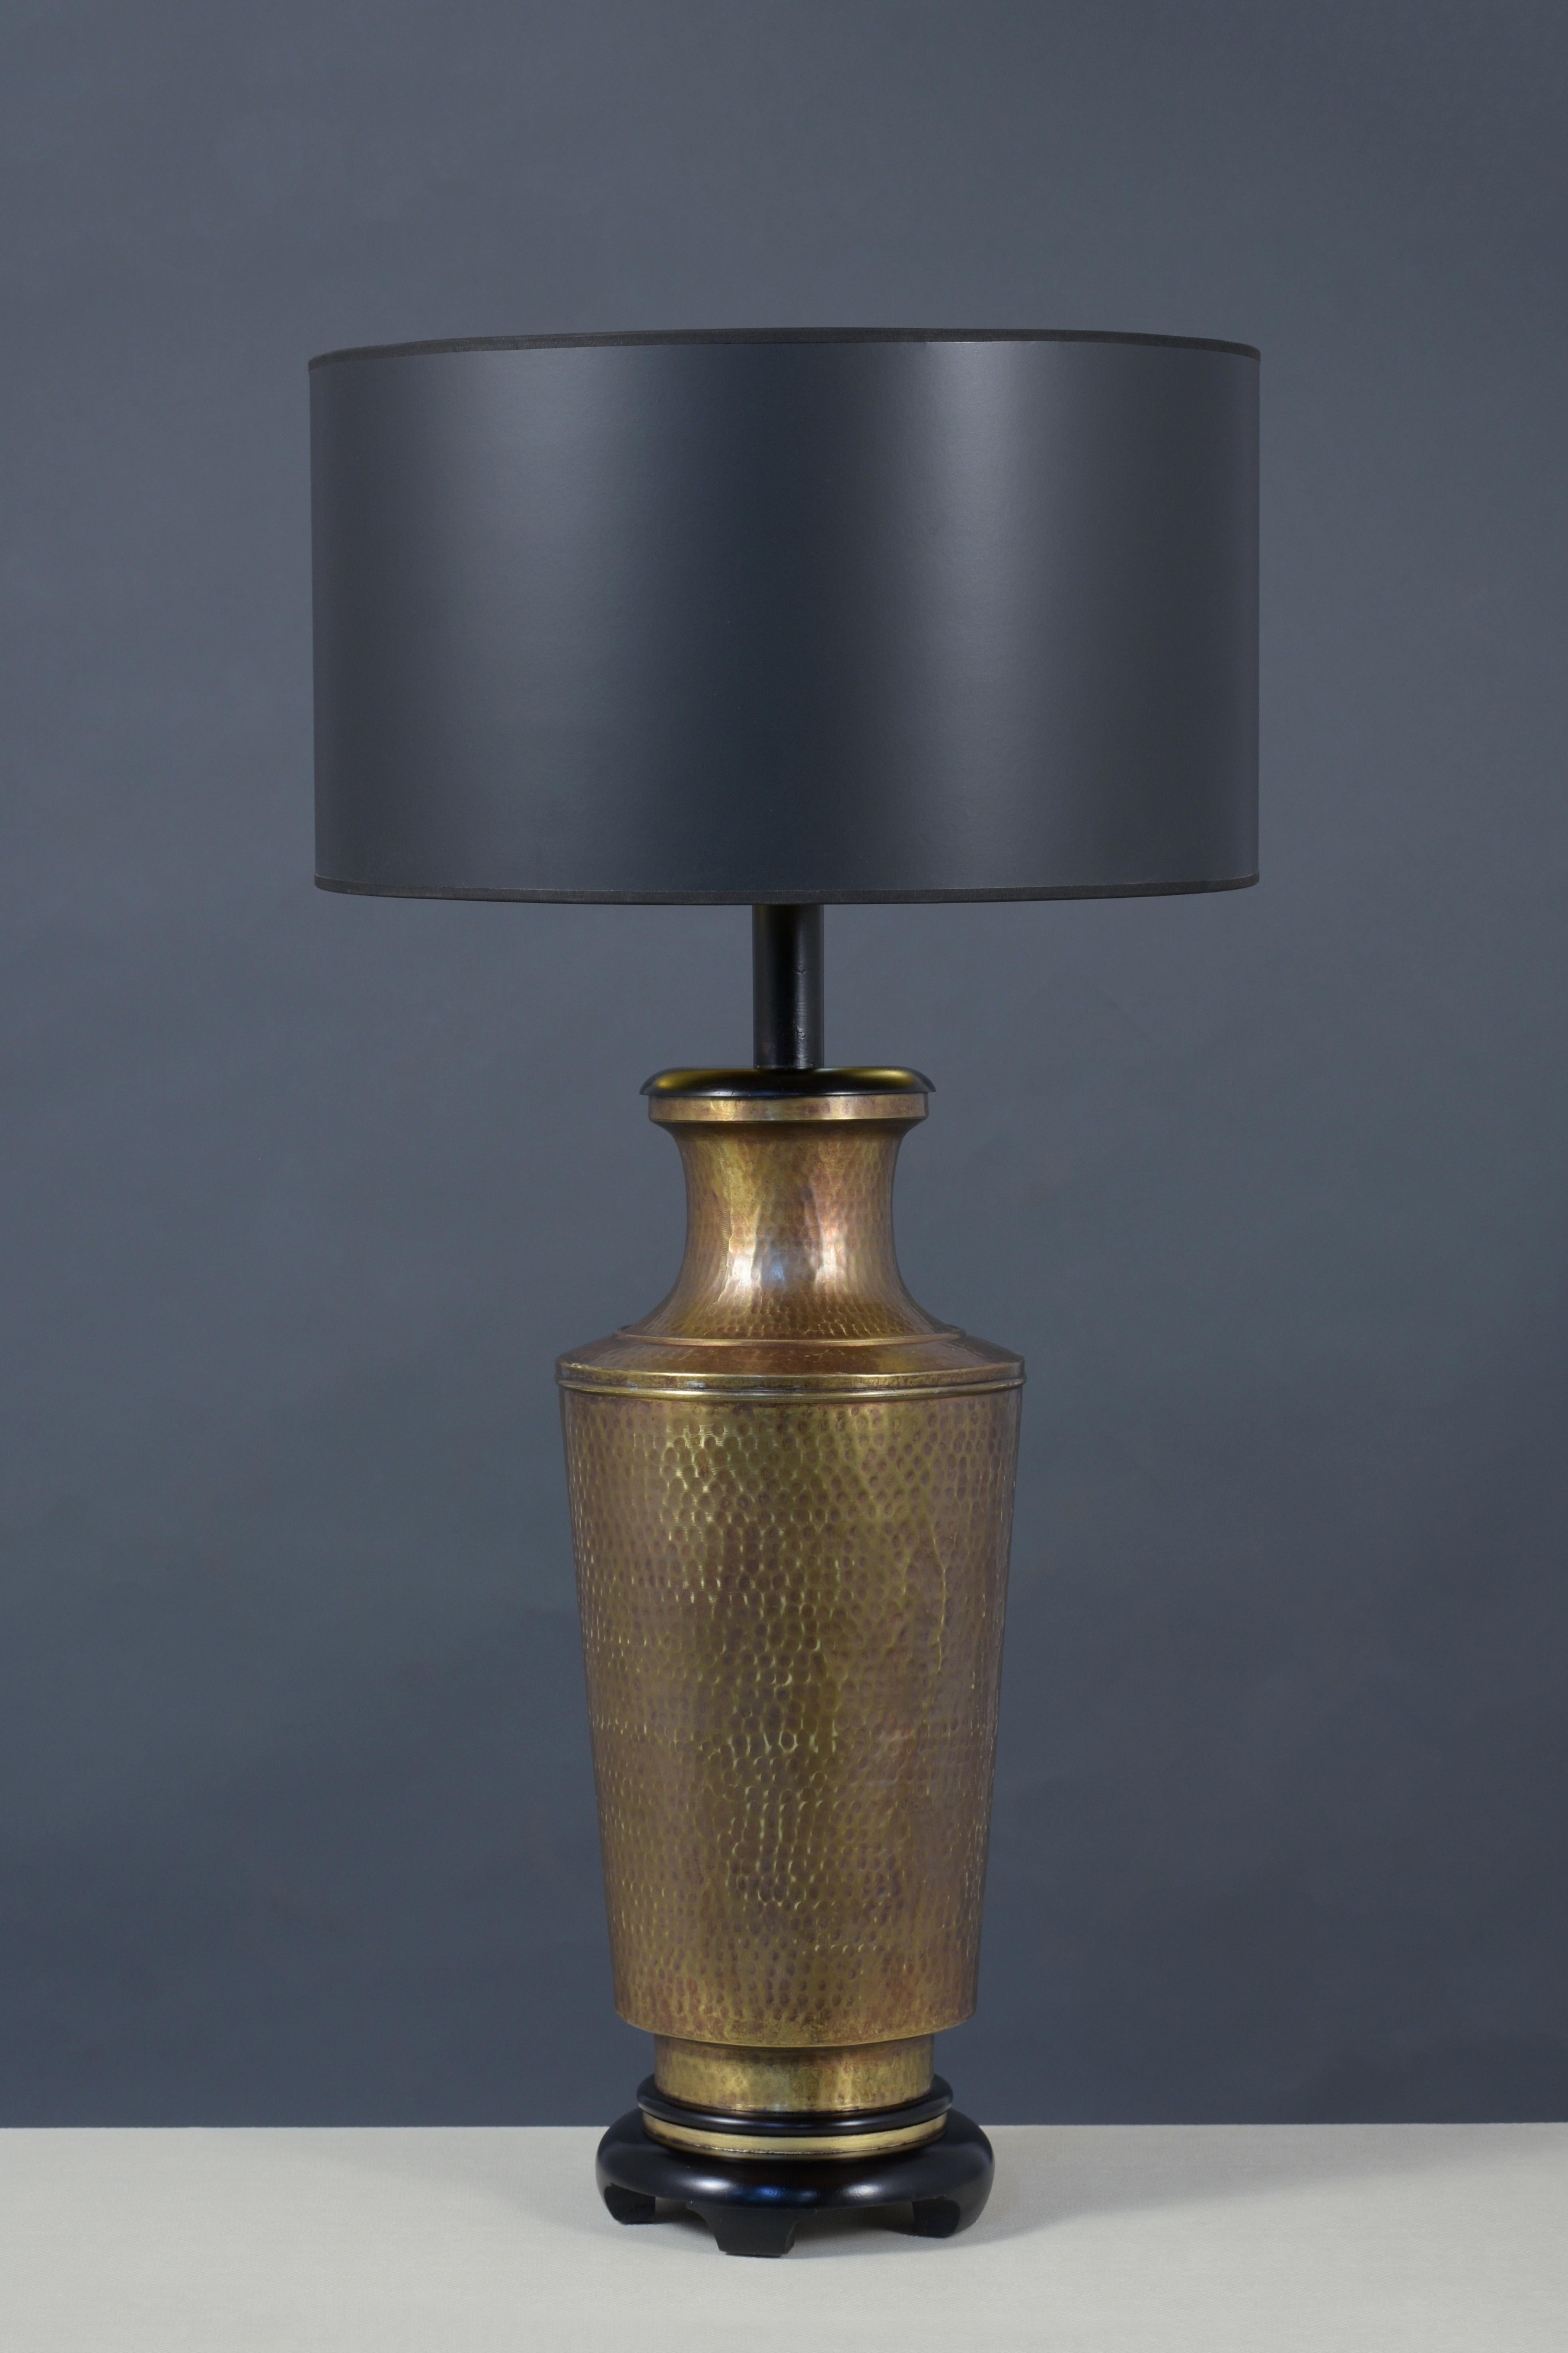 A pair of vintage table lamps handcrafted out of brass these pair of lamps have been fully restored and are wired for U.S standards and features new black and gold color interior shades a large eye-catching hammered design vase sitting on a carved